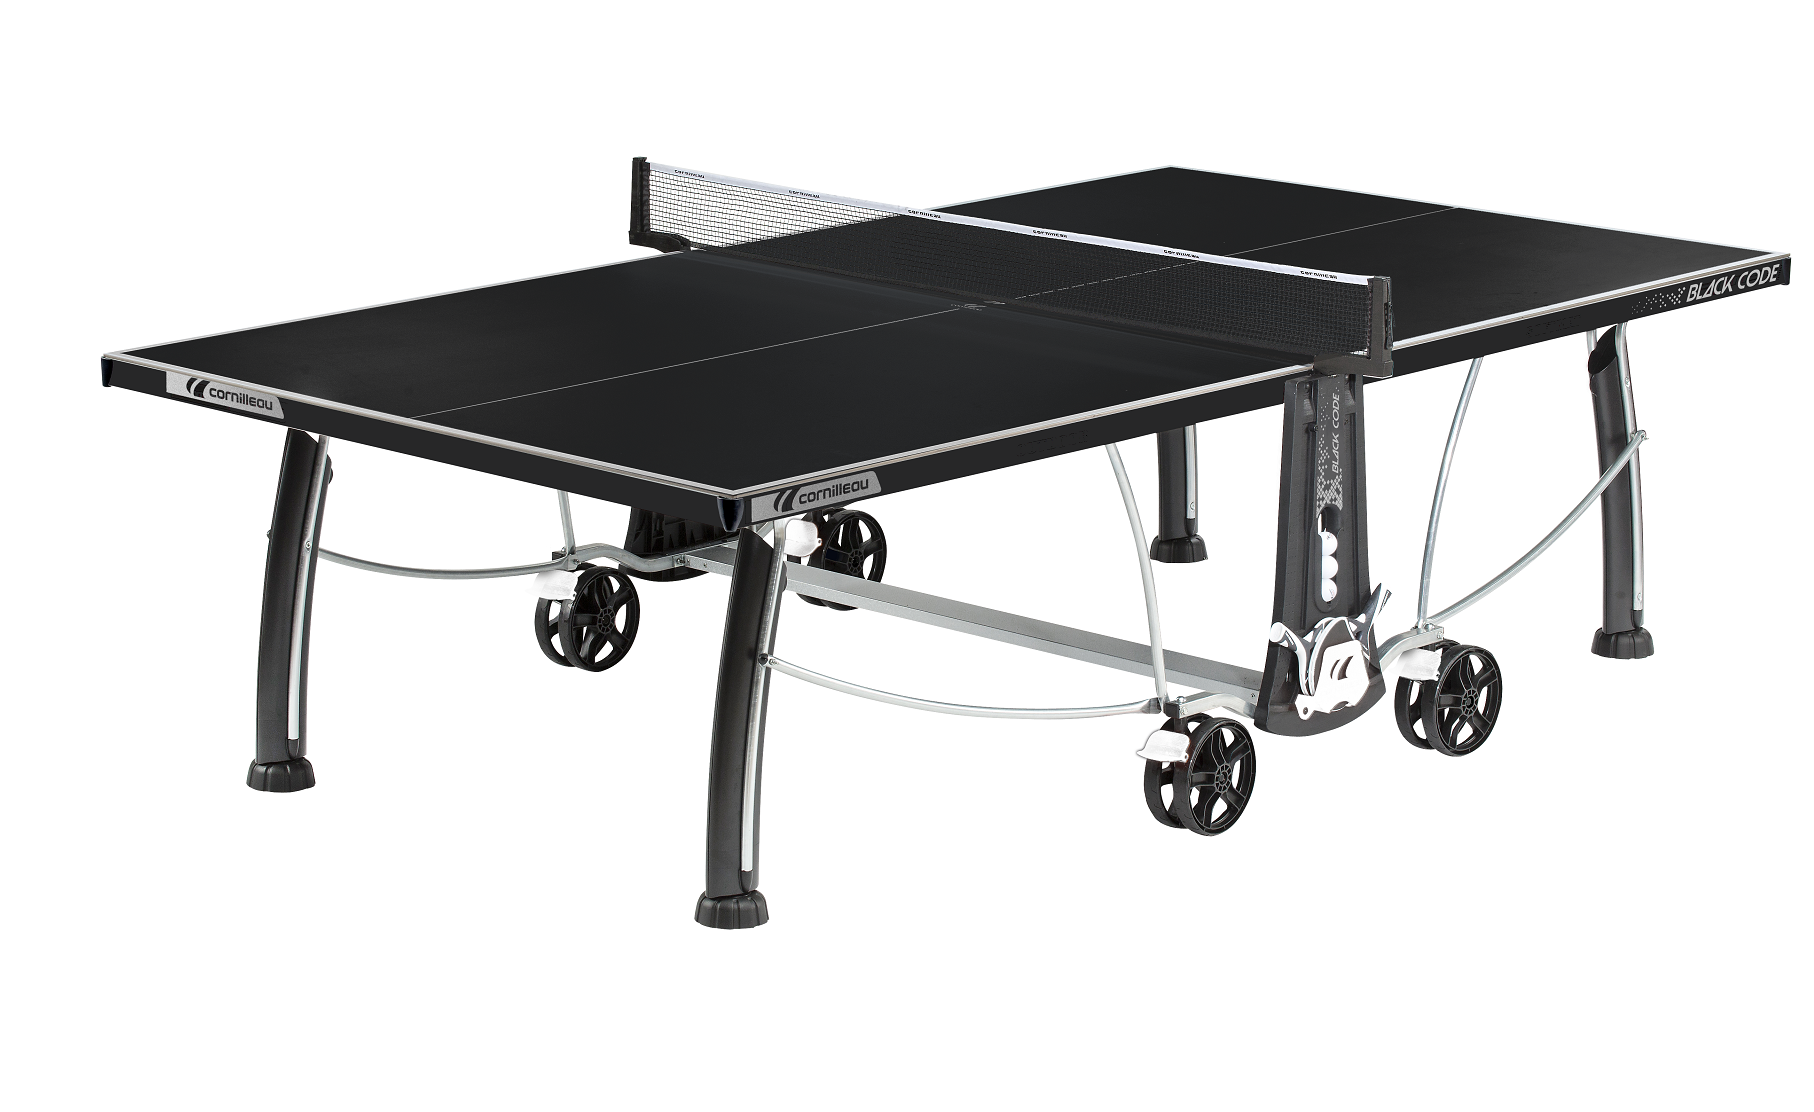 Mesa Ping Pong Lifestyle outdoor Cornilleau